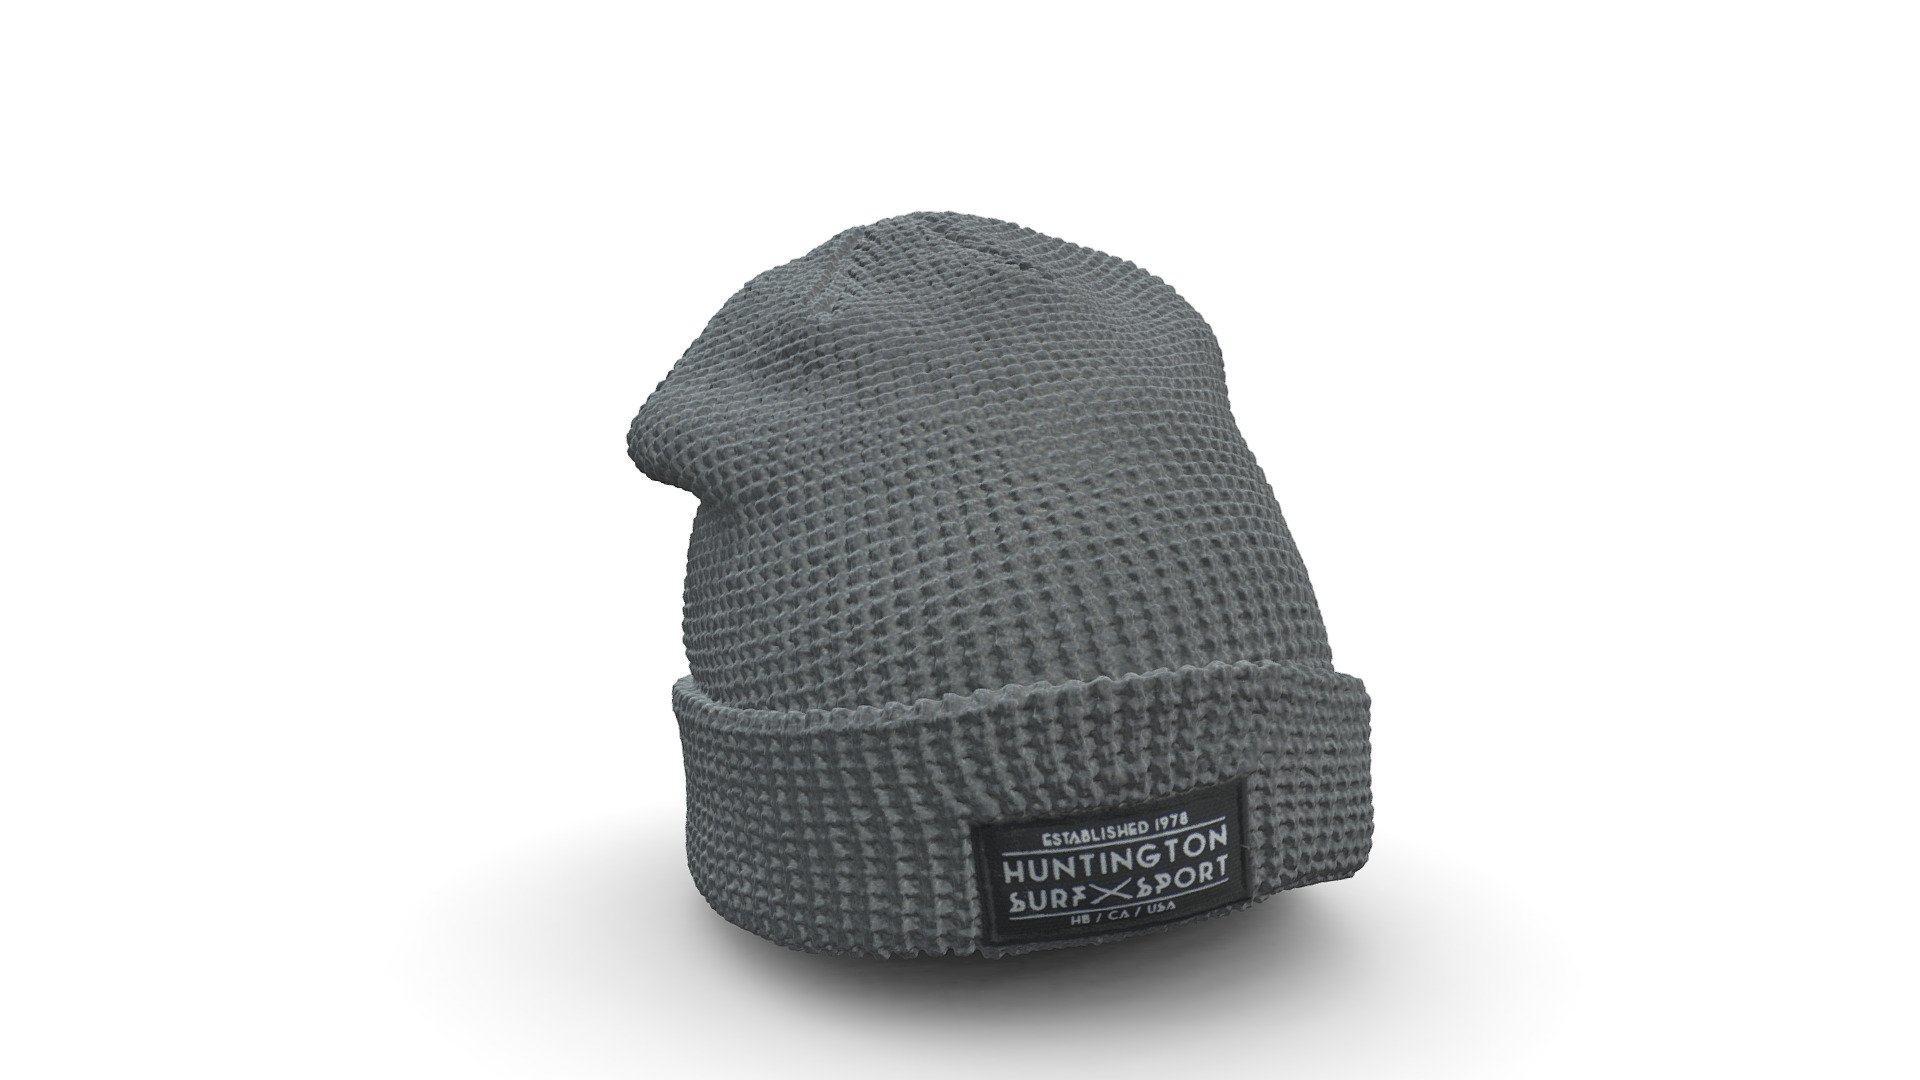 An example of our 3D scanning capabilities for apparel items.

This grey beanie was 3D scanned on a mannequin head, then processed a 0.4mm resolution and given a 4K texture 3d model